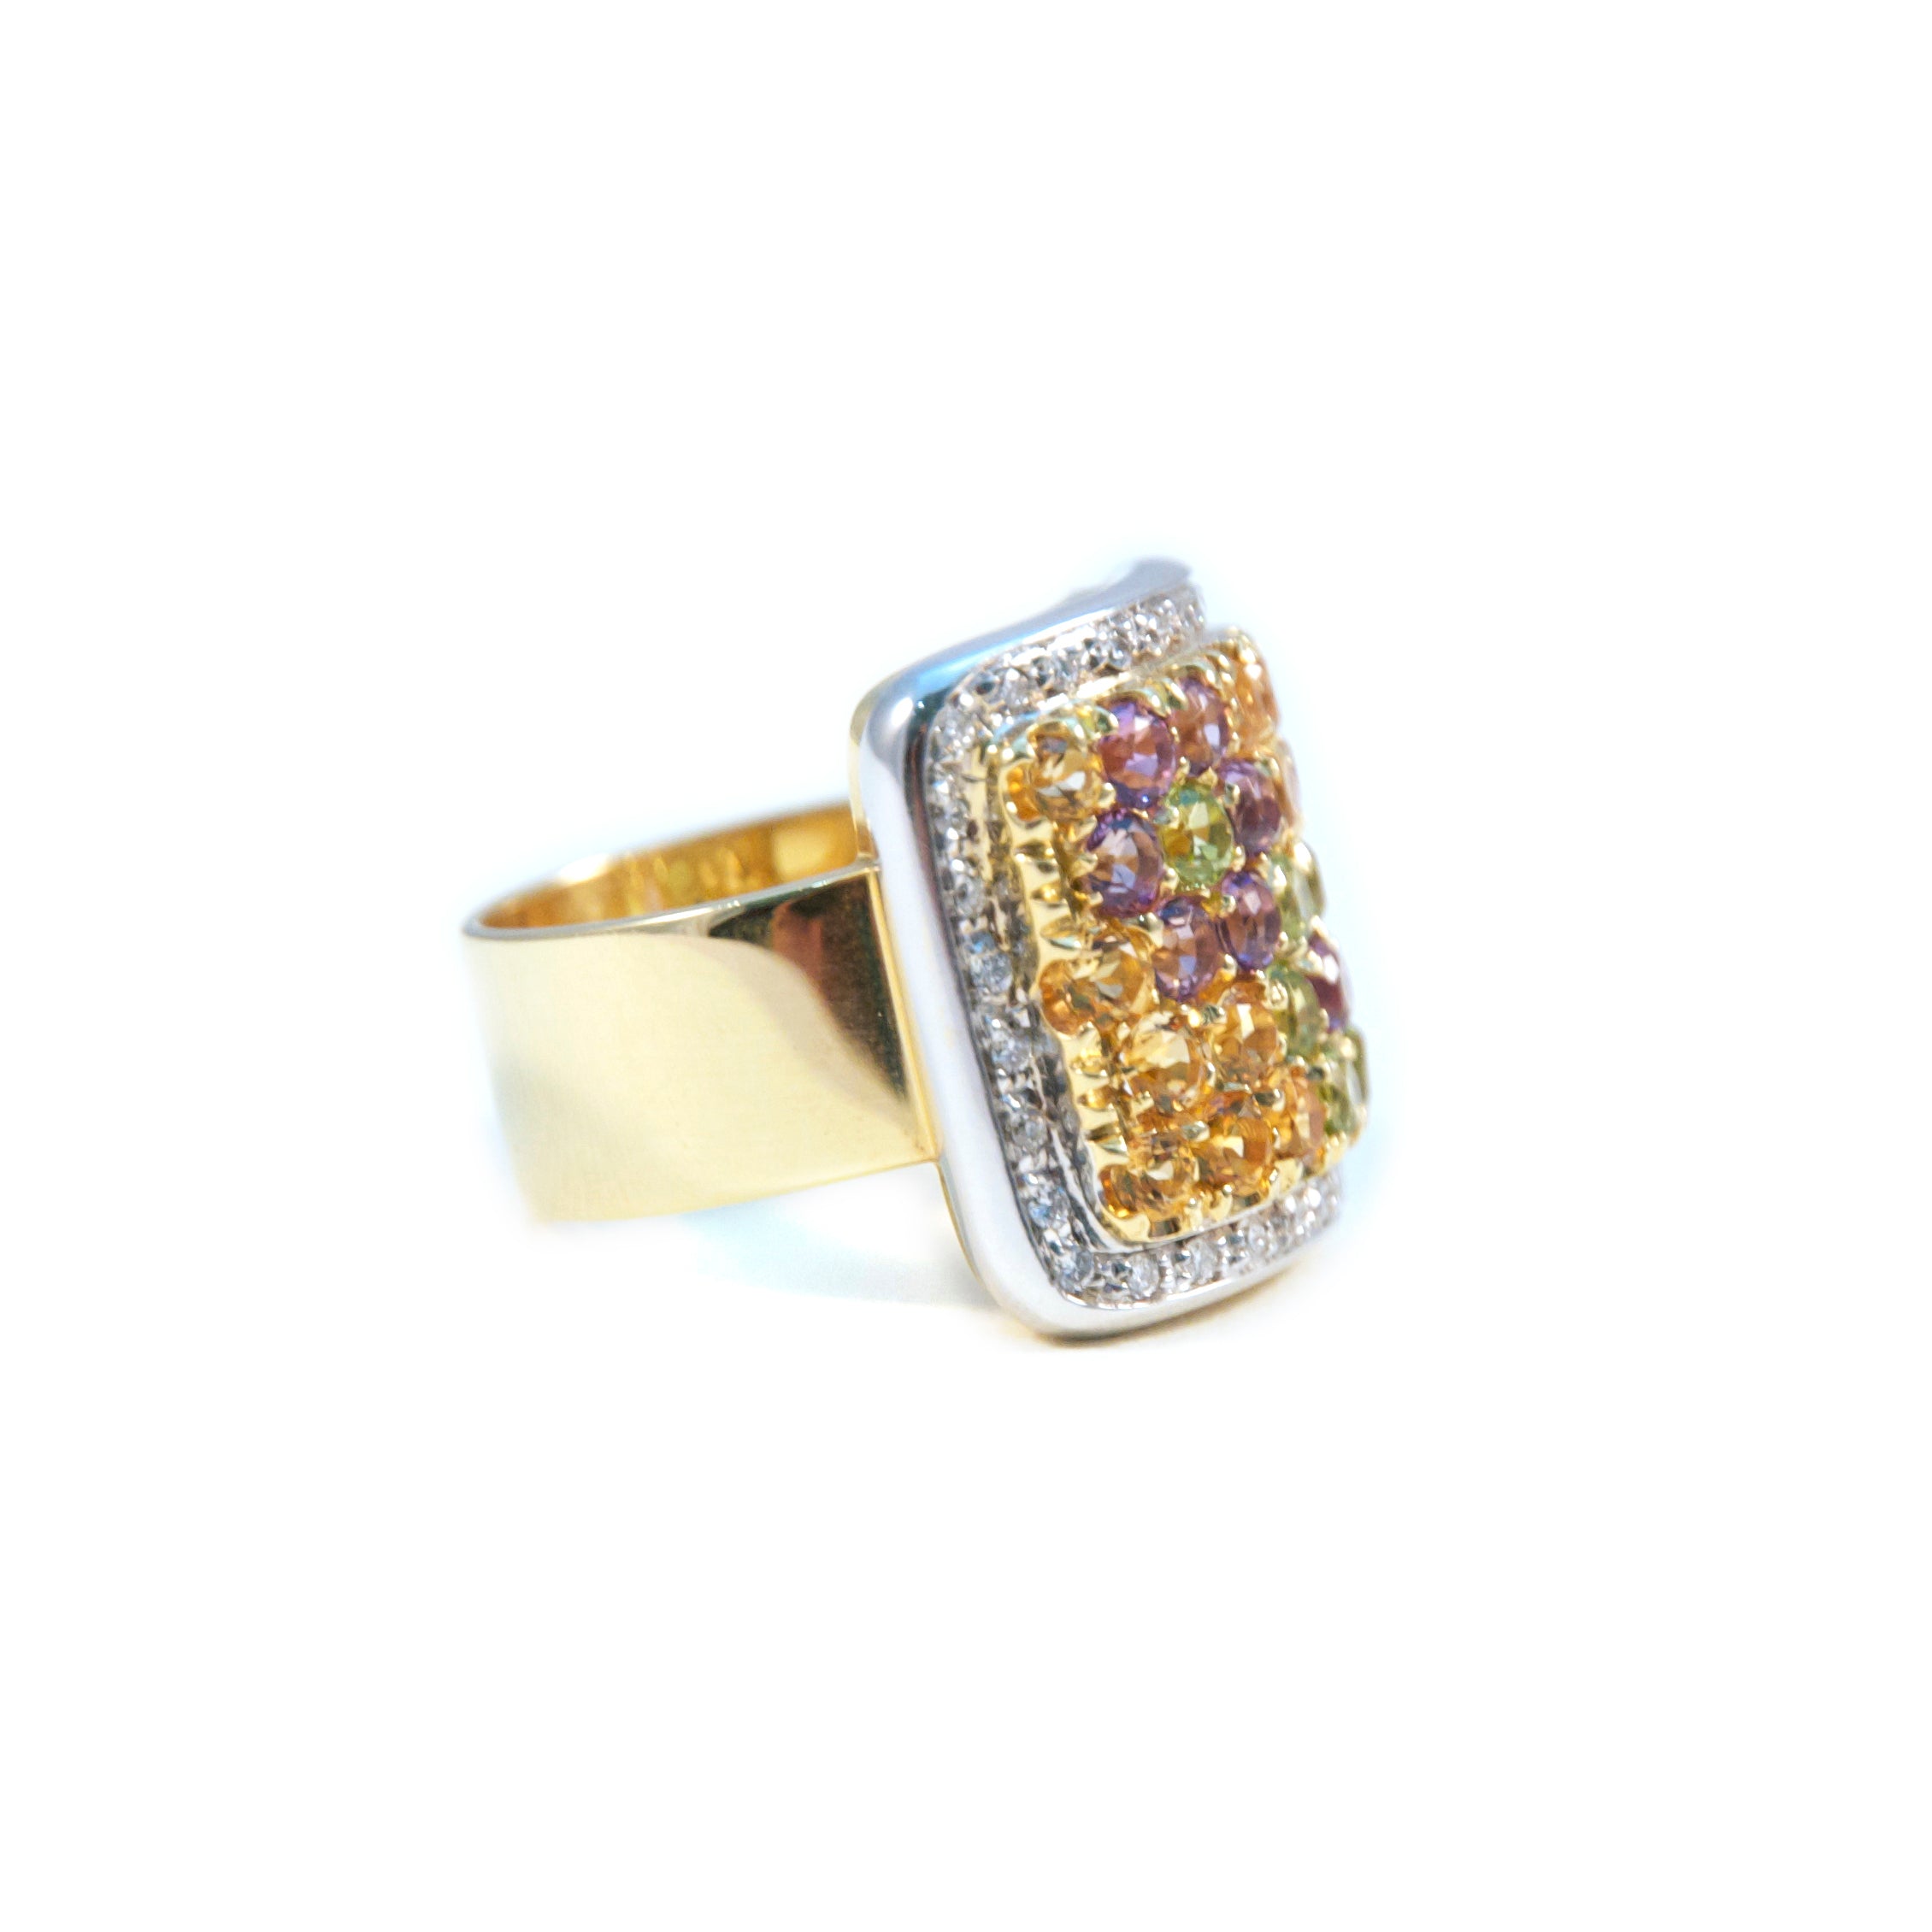 A timeless design, crafted with Pascale Bruni's signature blend of elegance and luxury. This dazzling ring features an 18k two-tone gold band set with 0.32 cts of round diamonds that sparkle alongside the deep purple amethyst and warm yellow citrine stones.